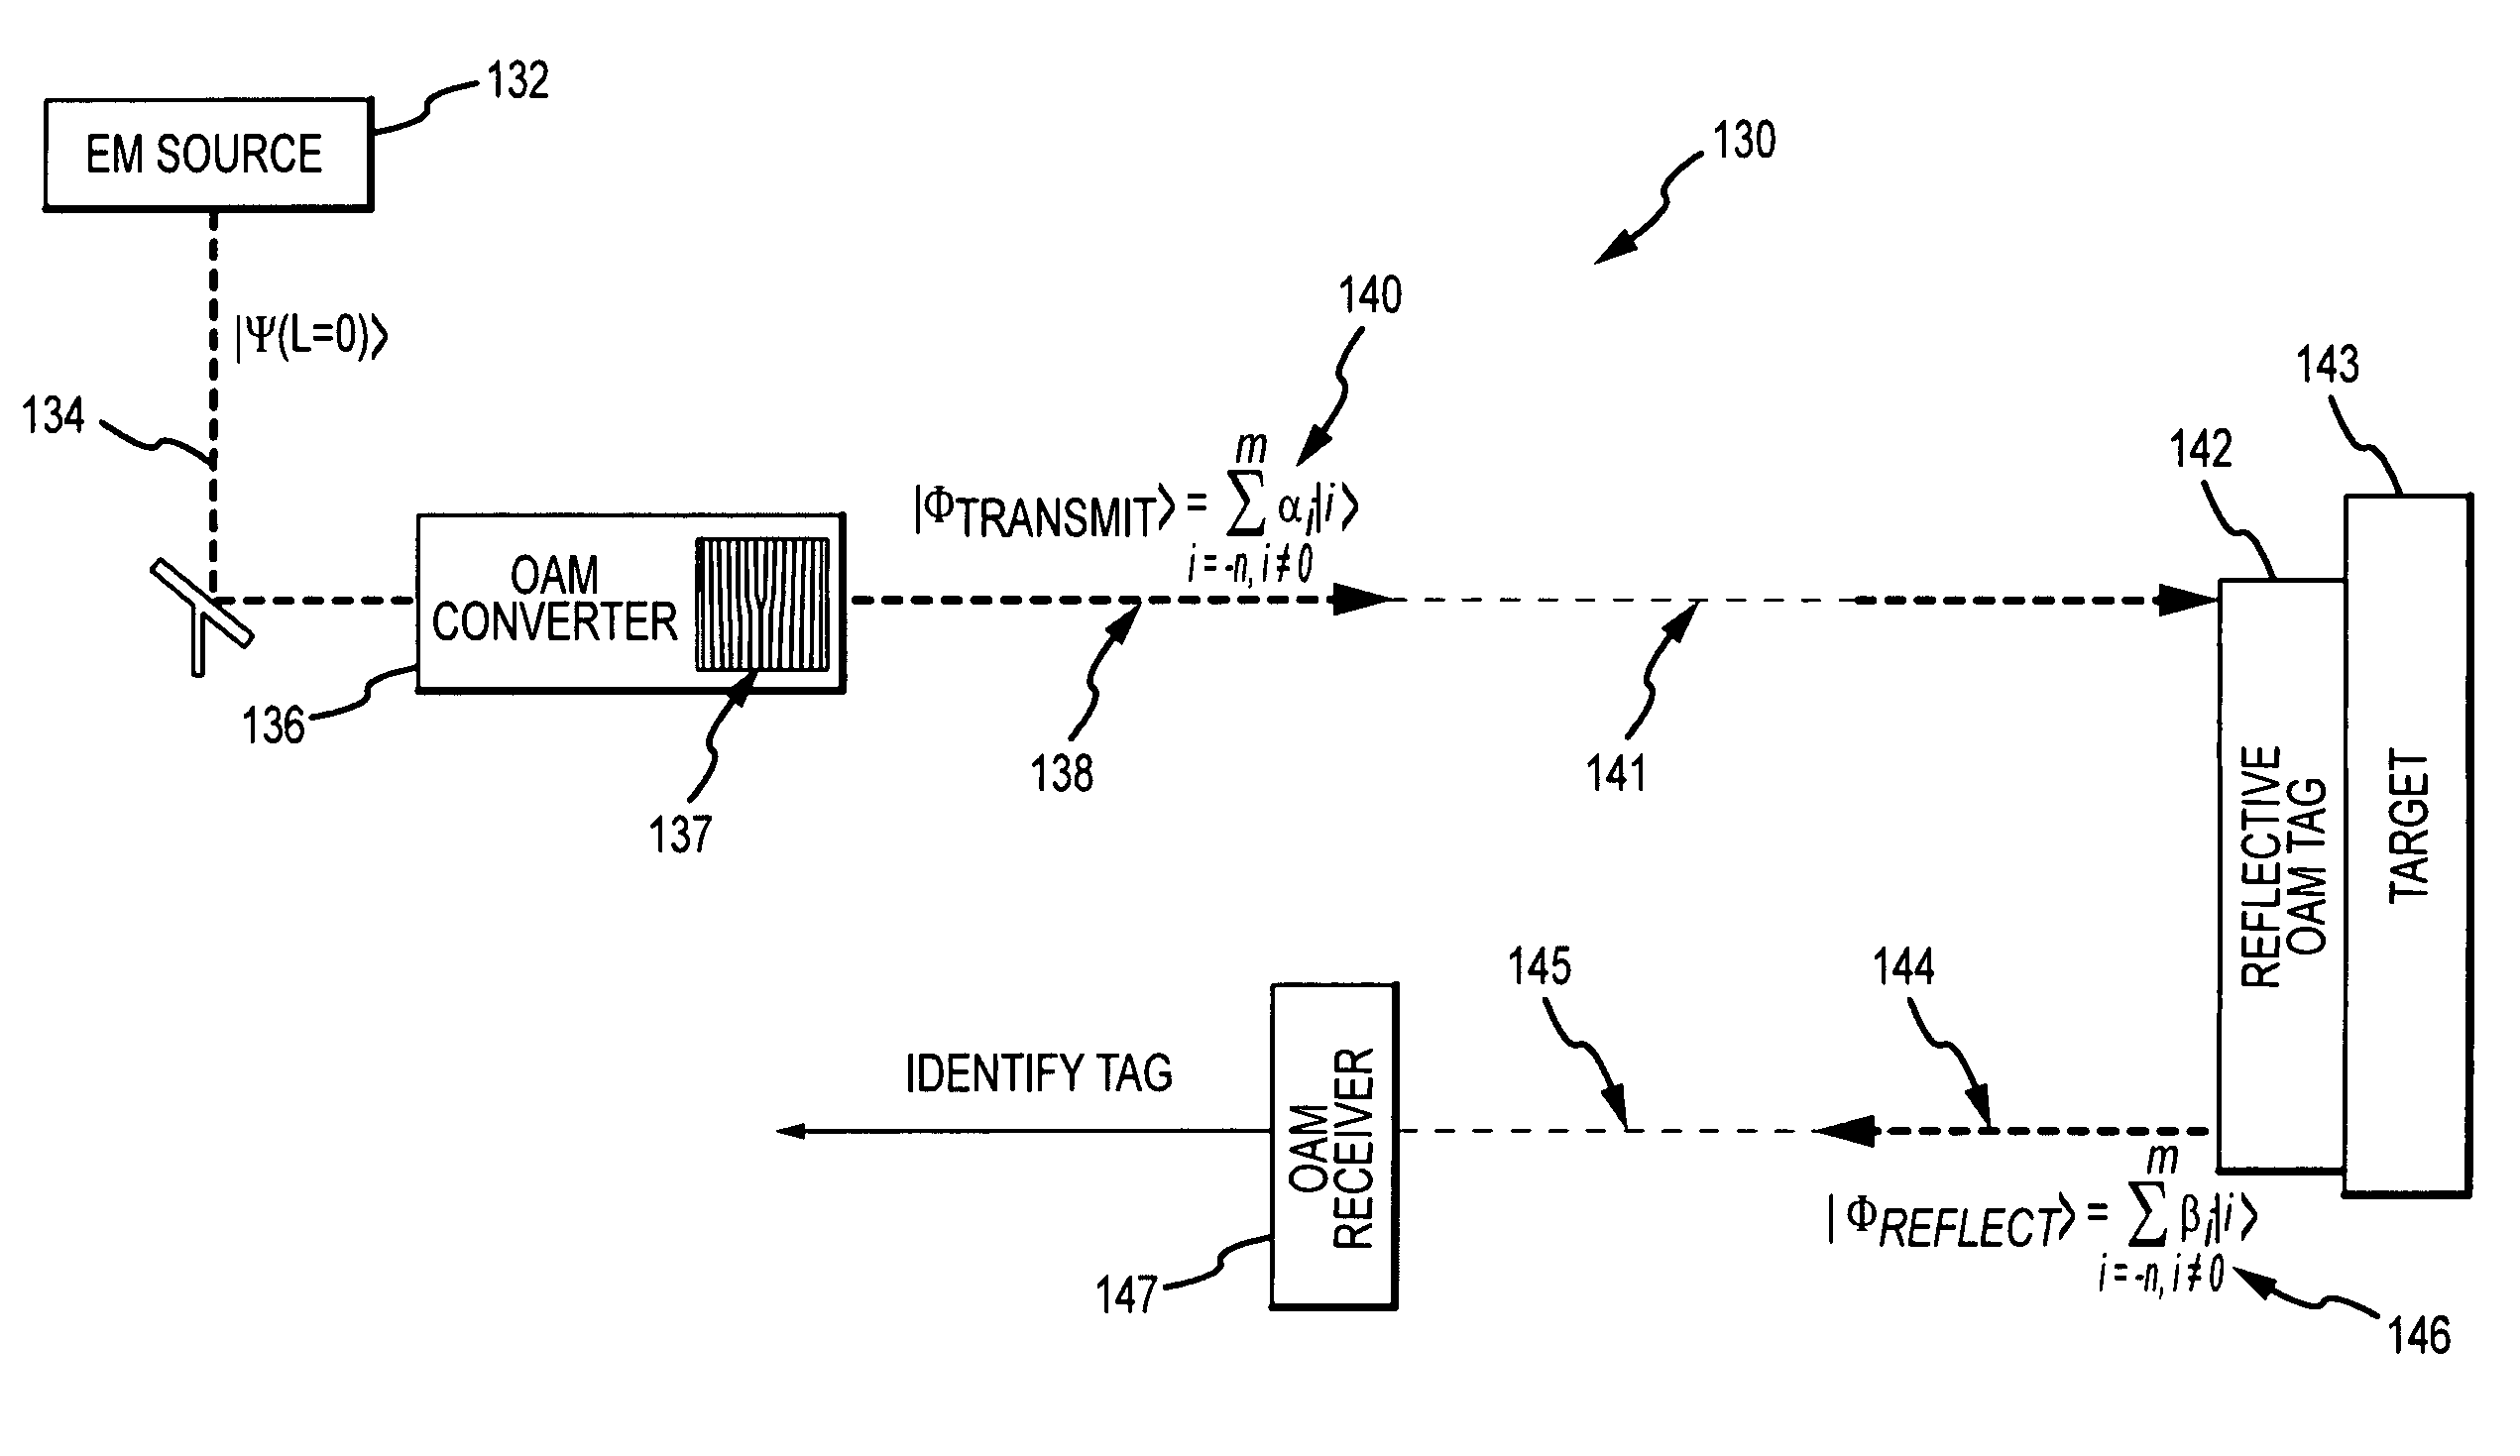 System and method of orbital angular momentum (OAM) diverse signal processing using classical beams